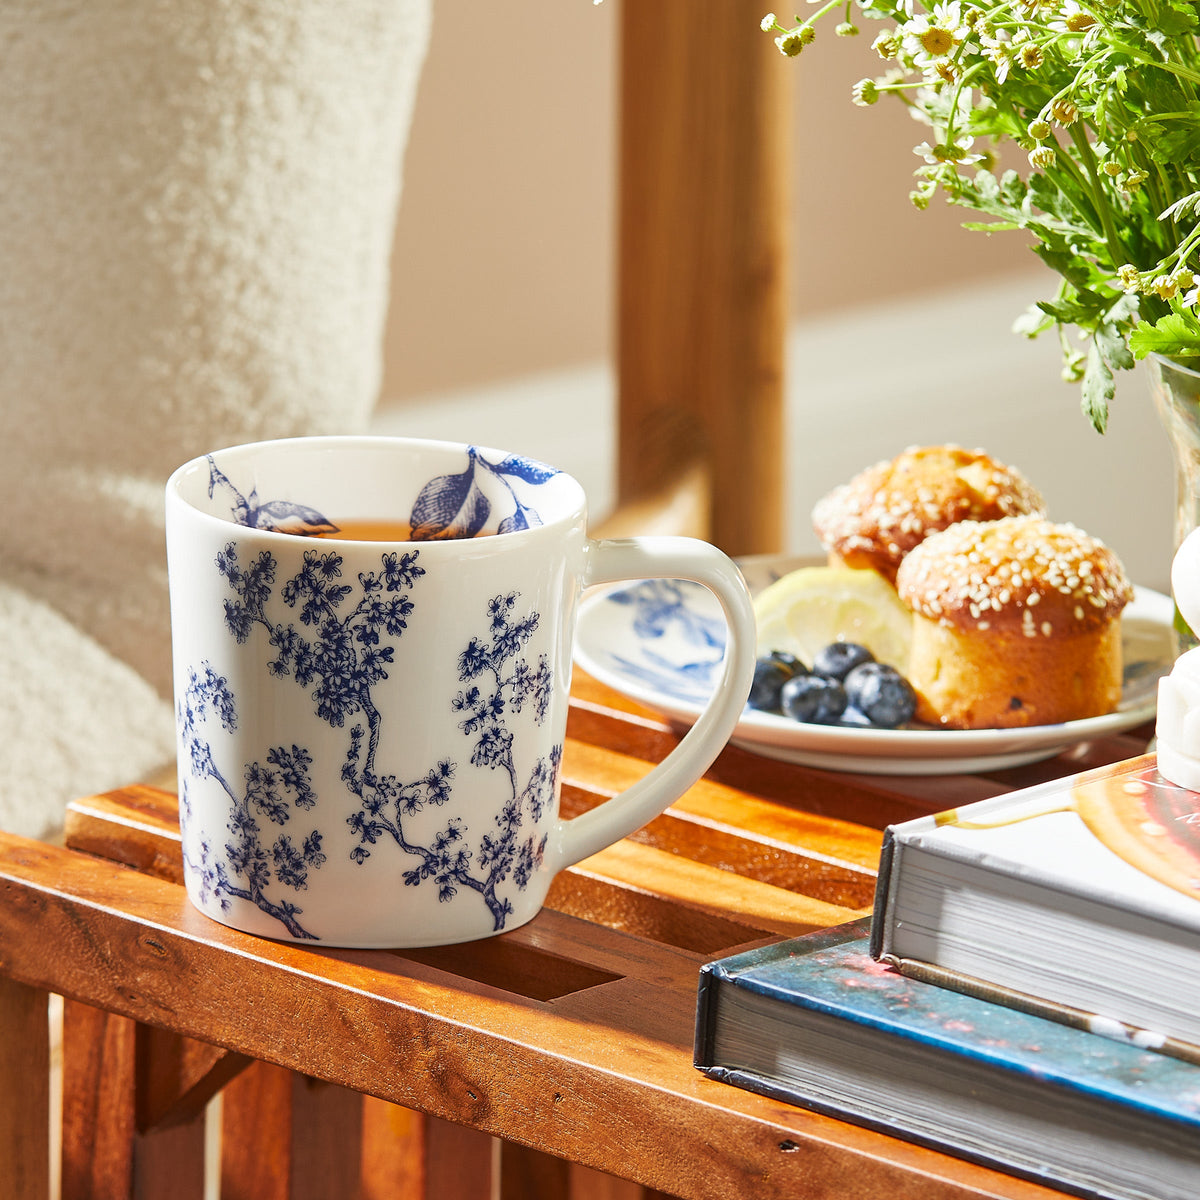 A **Chinoiserie Toile Mug** by **Caskata Artisanal Home**, reminiscent of Chinoiserie Toile, sits on a wooden surface next to books, a plant, and a plate with muffins, blueberries, and lemon slices.